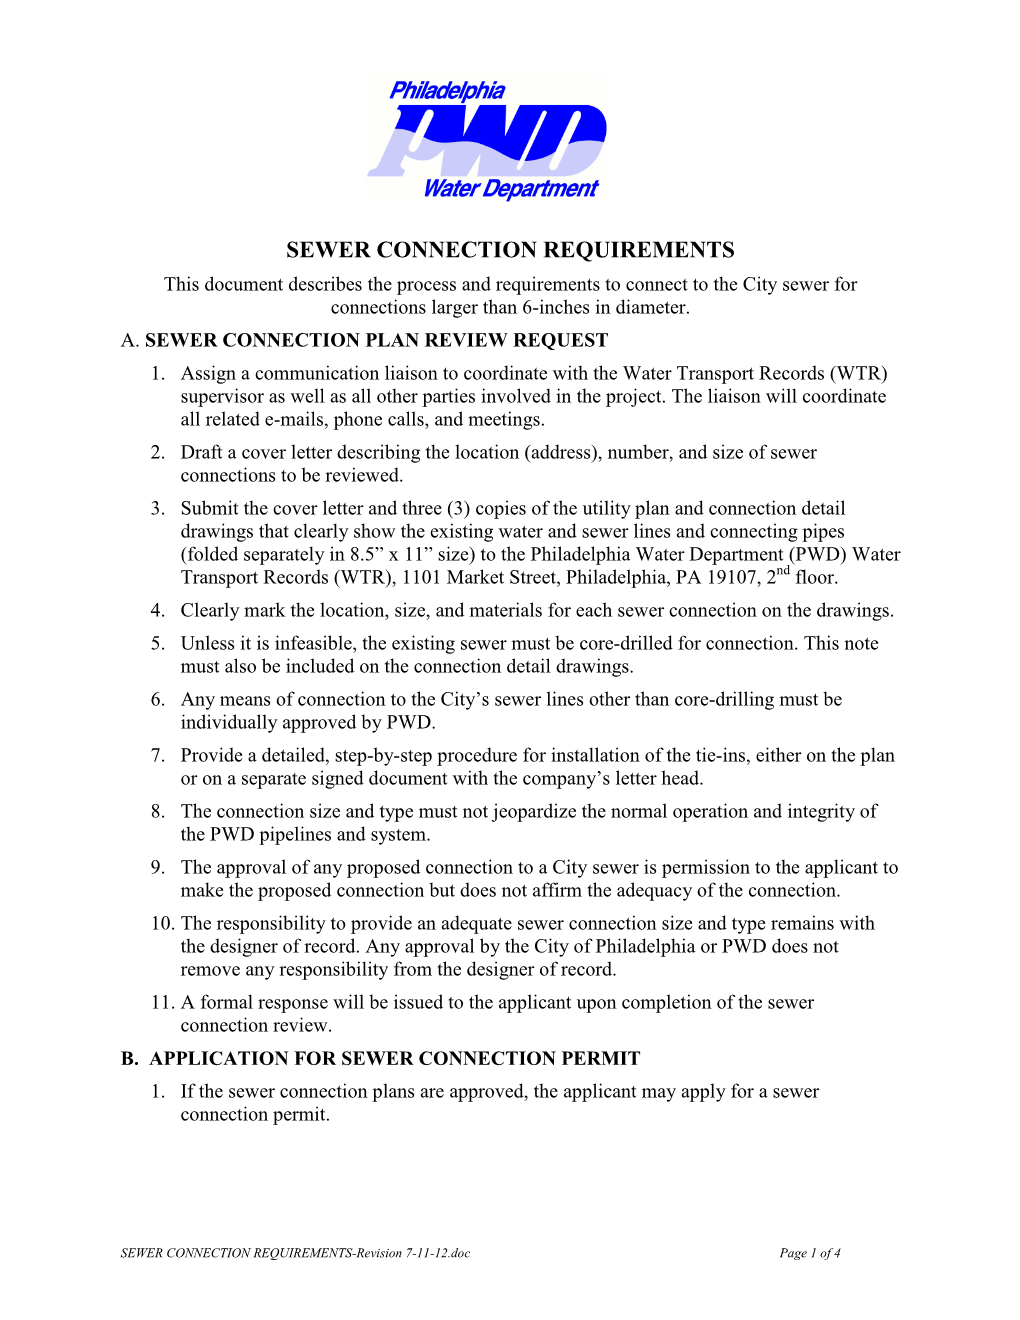 This Document Describes the Process and Requirements to Connect to the City Sewer for Connections Larger Than 6-Inches in Diameter